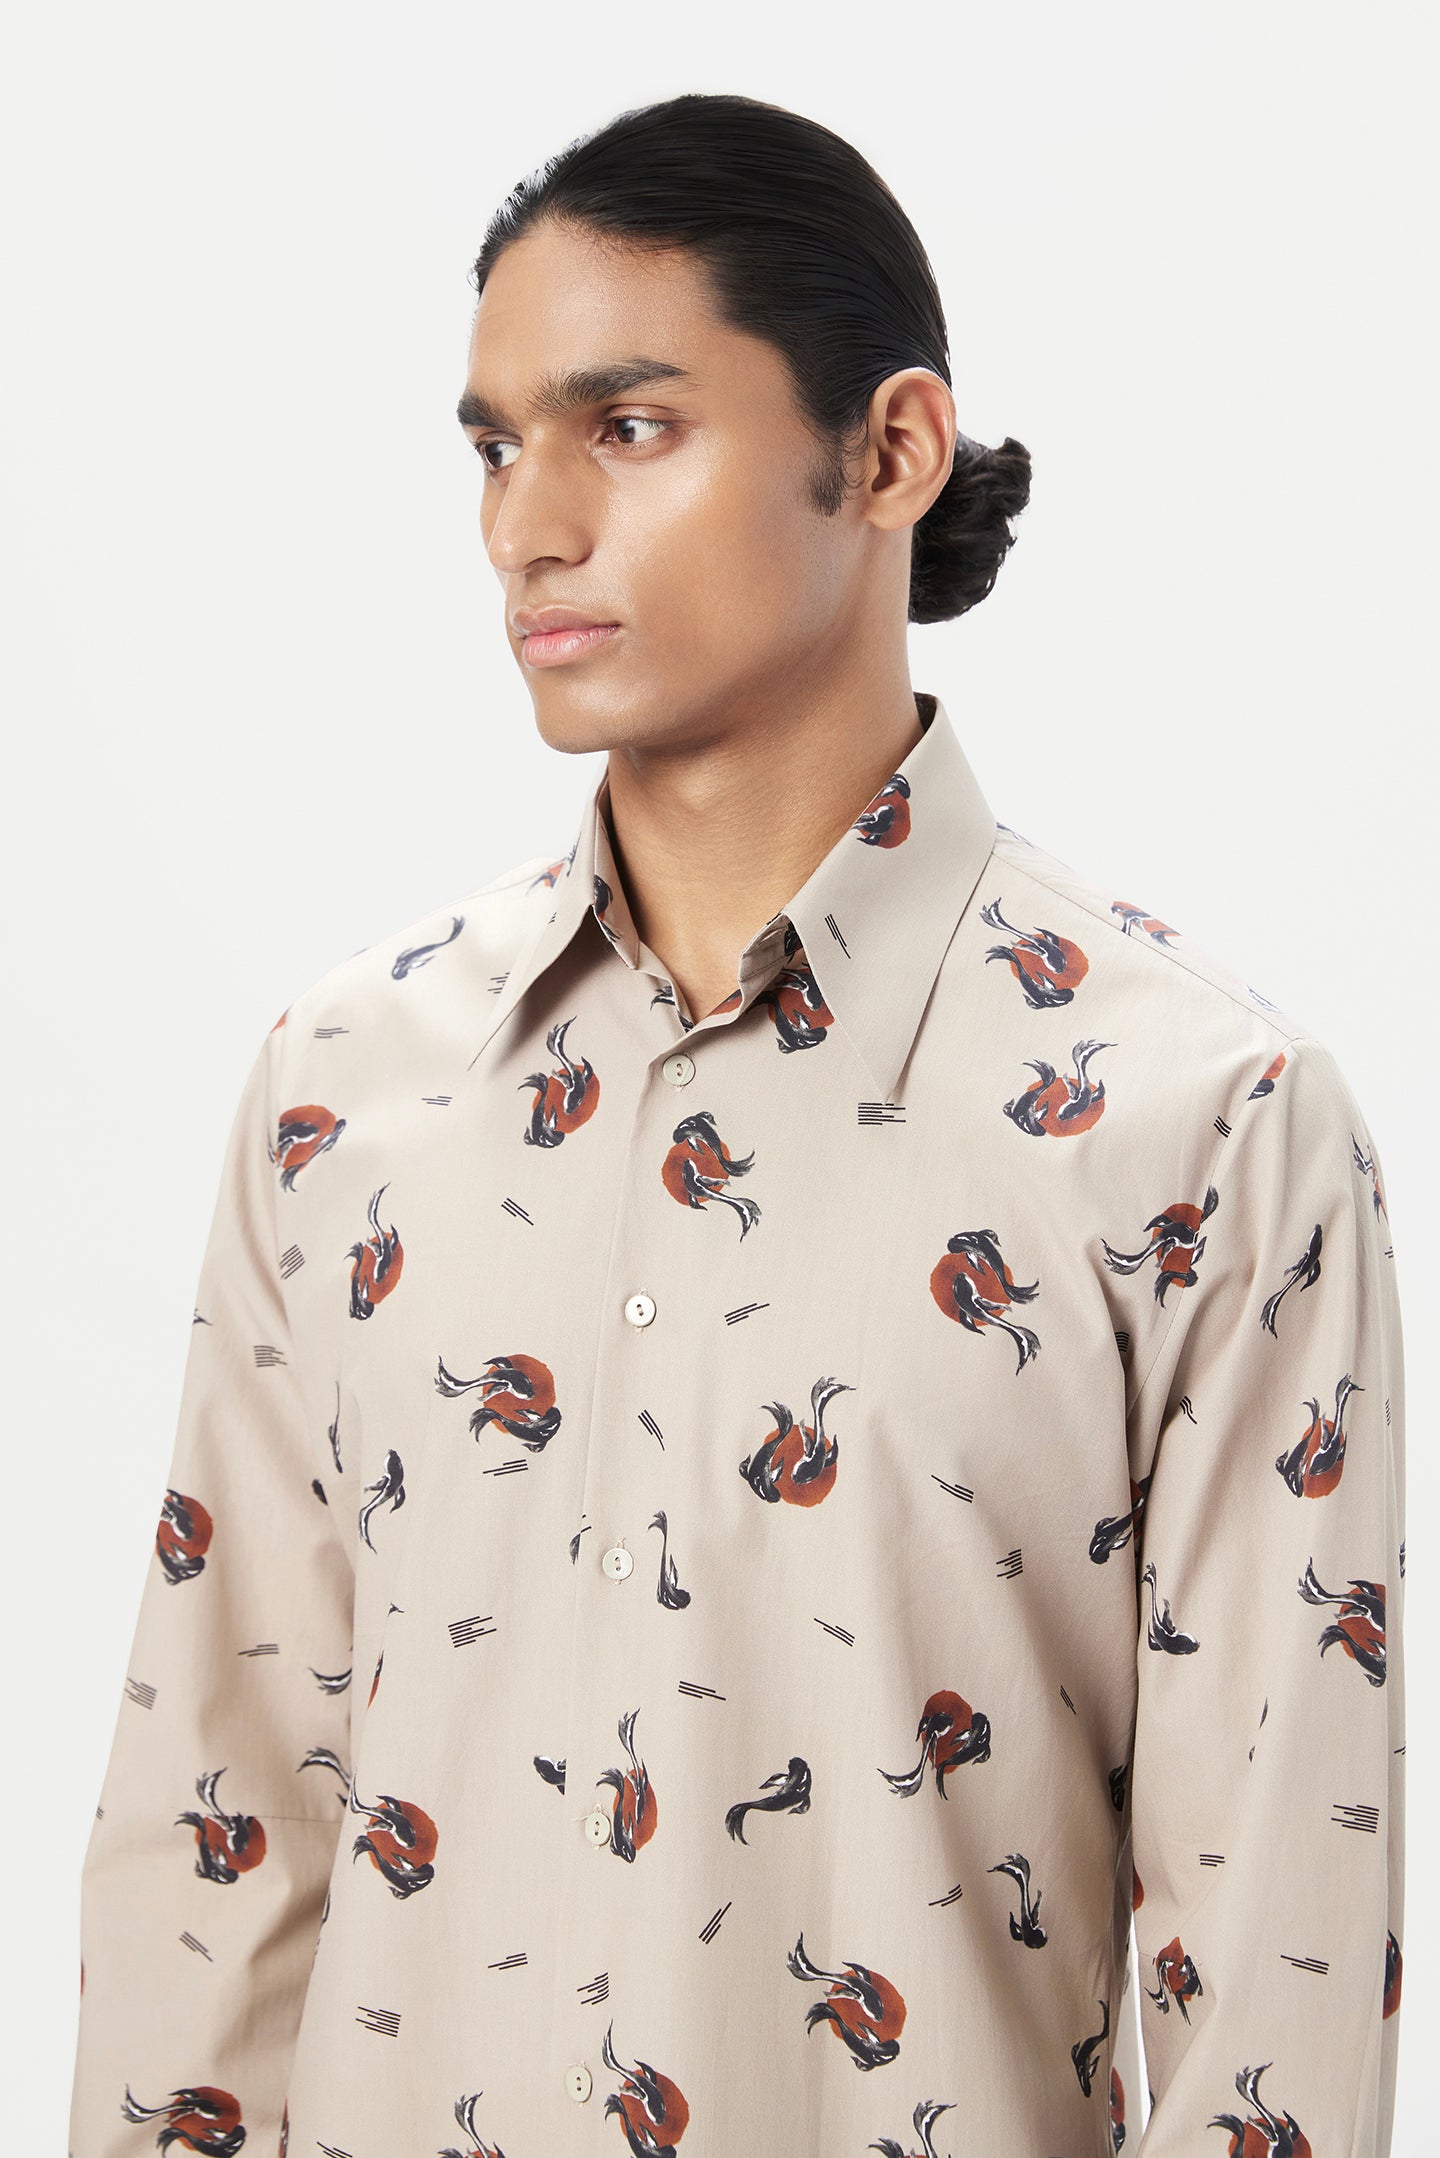 Regular Fit Button-Down Shirt in an All-Over Fish Print